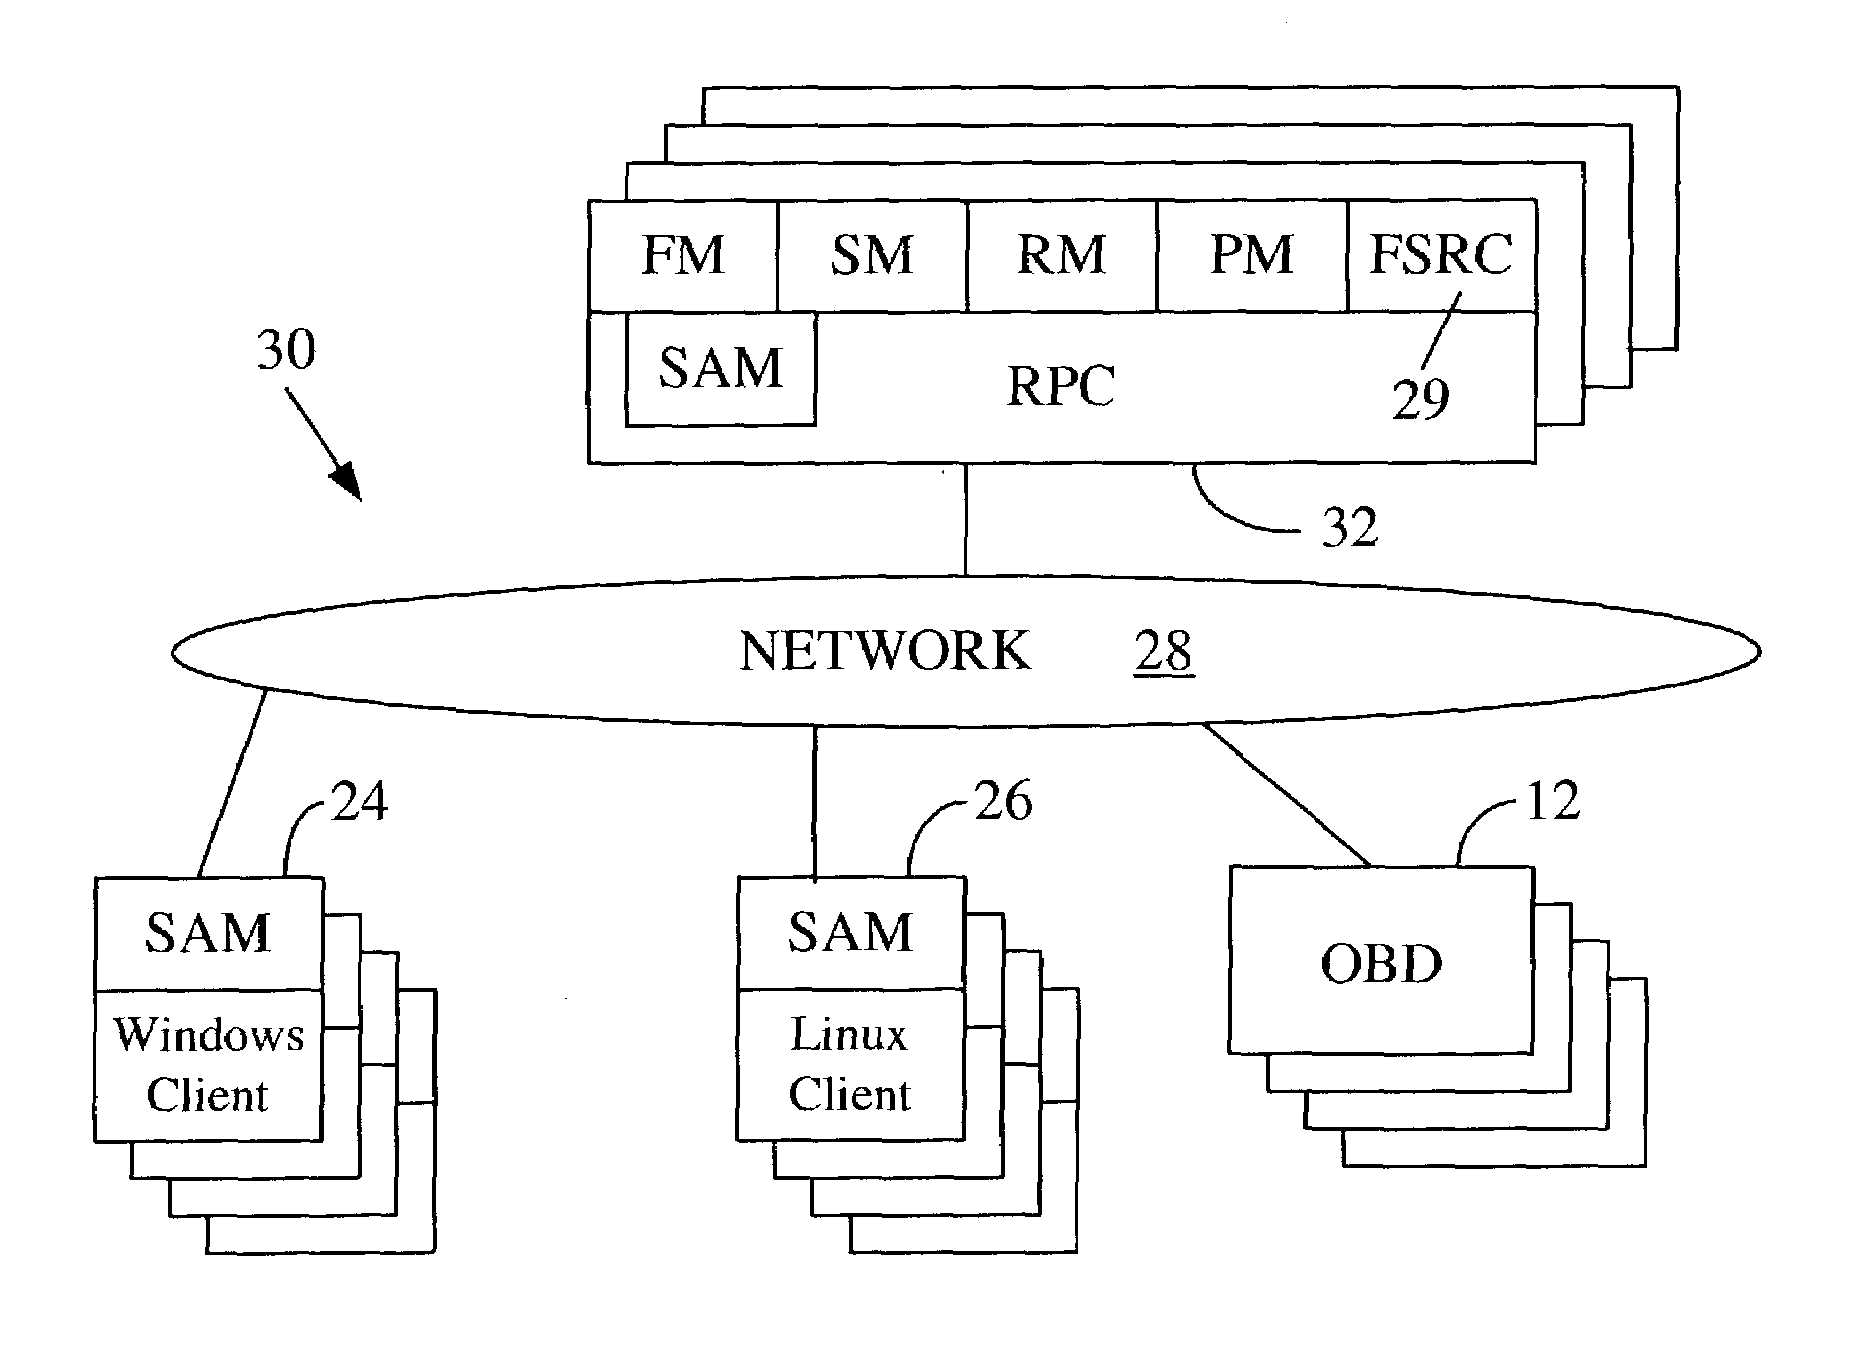 Recovering and checking large file systems in an object-based data storage system